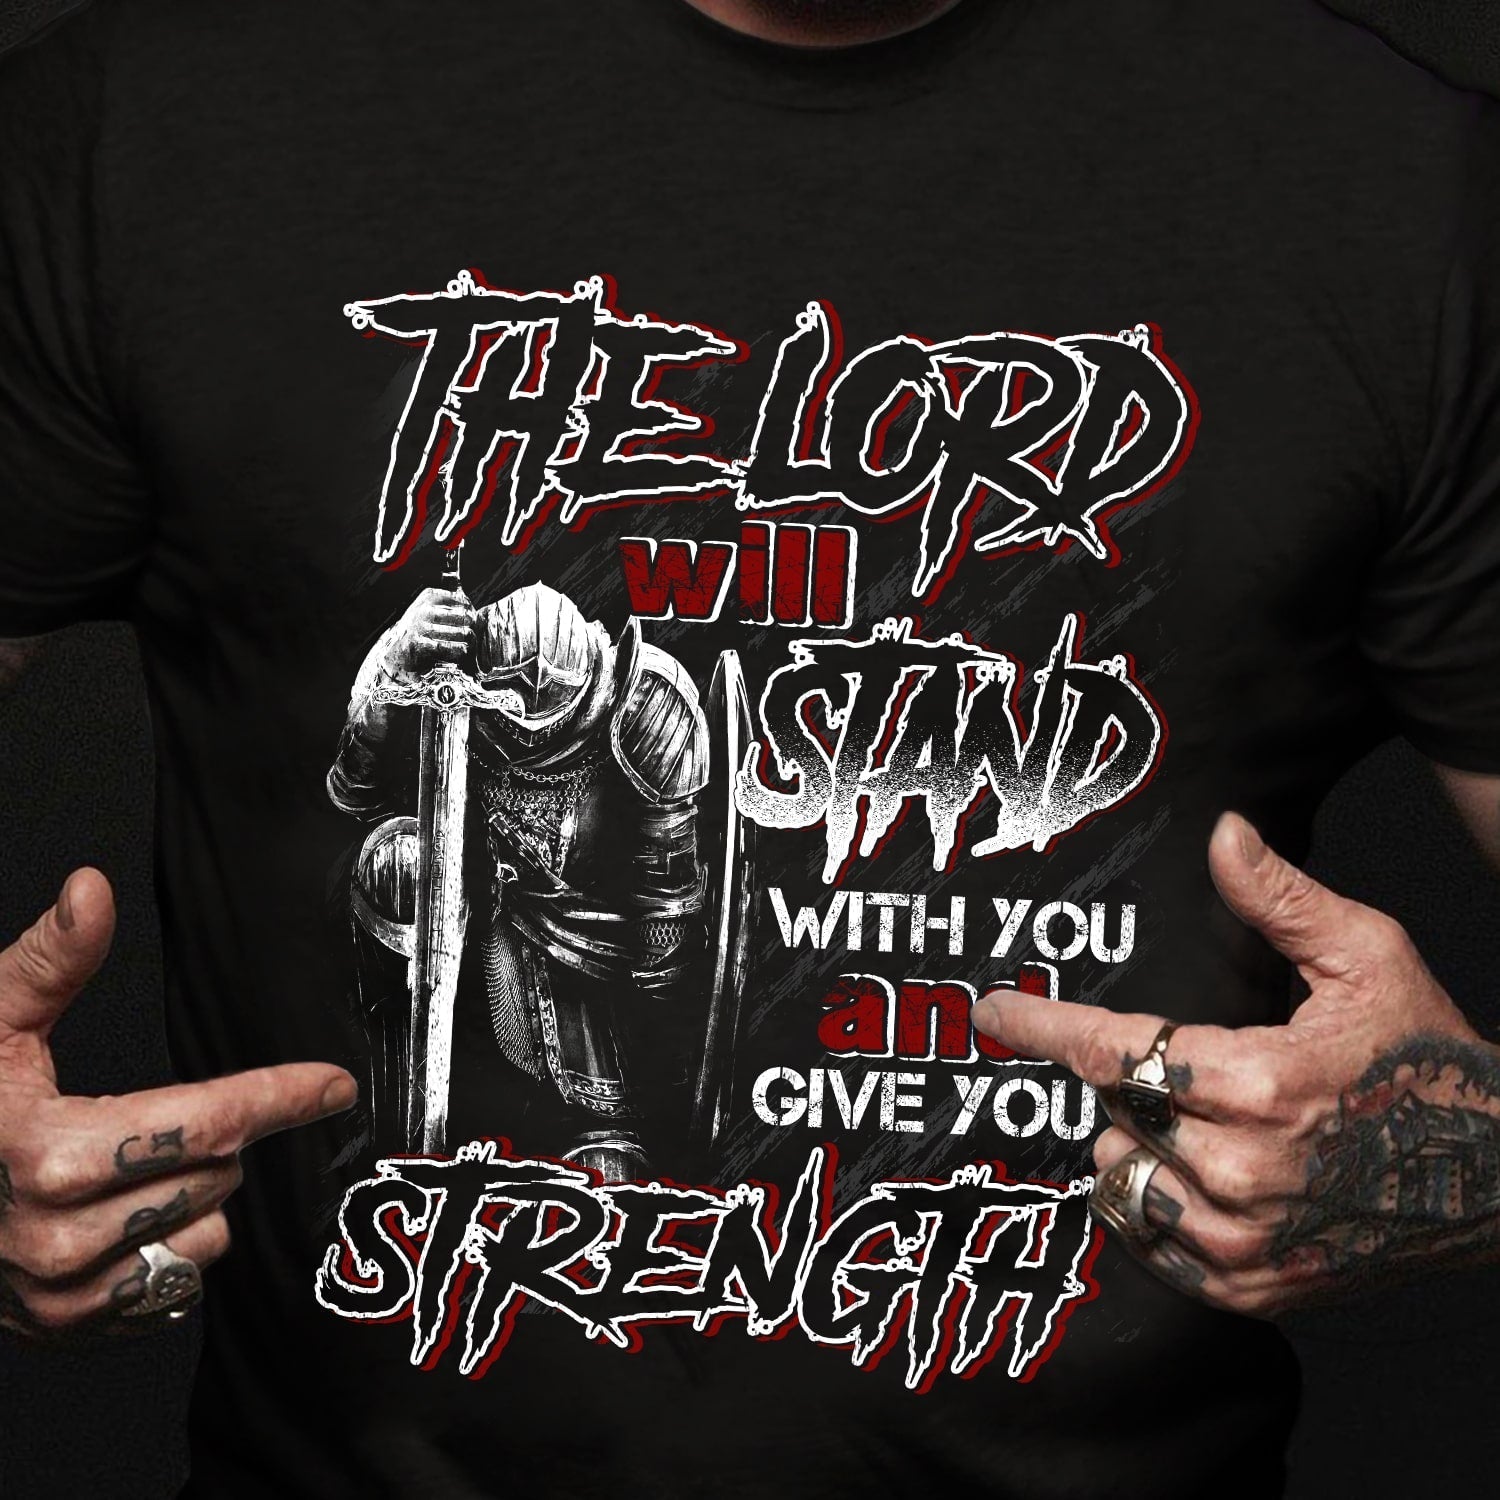 Jesus- The lord will stand with you – T Shirt